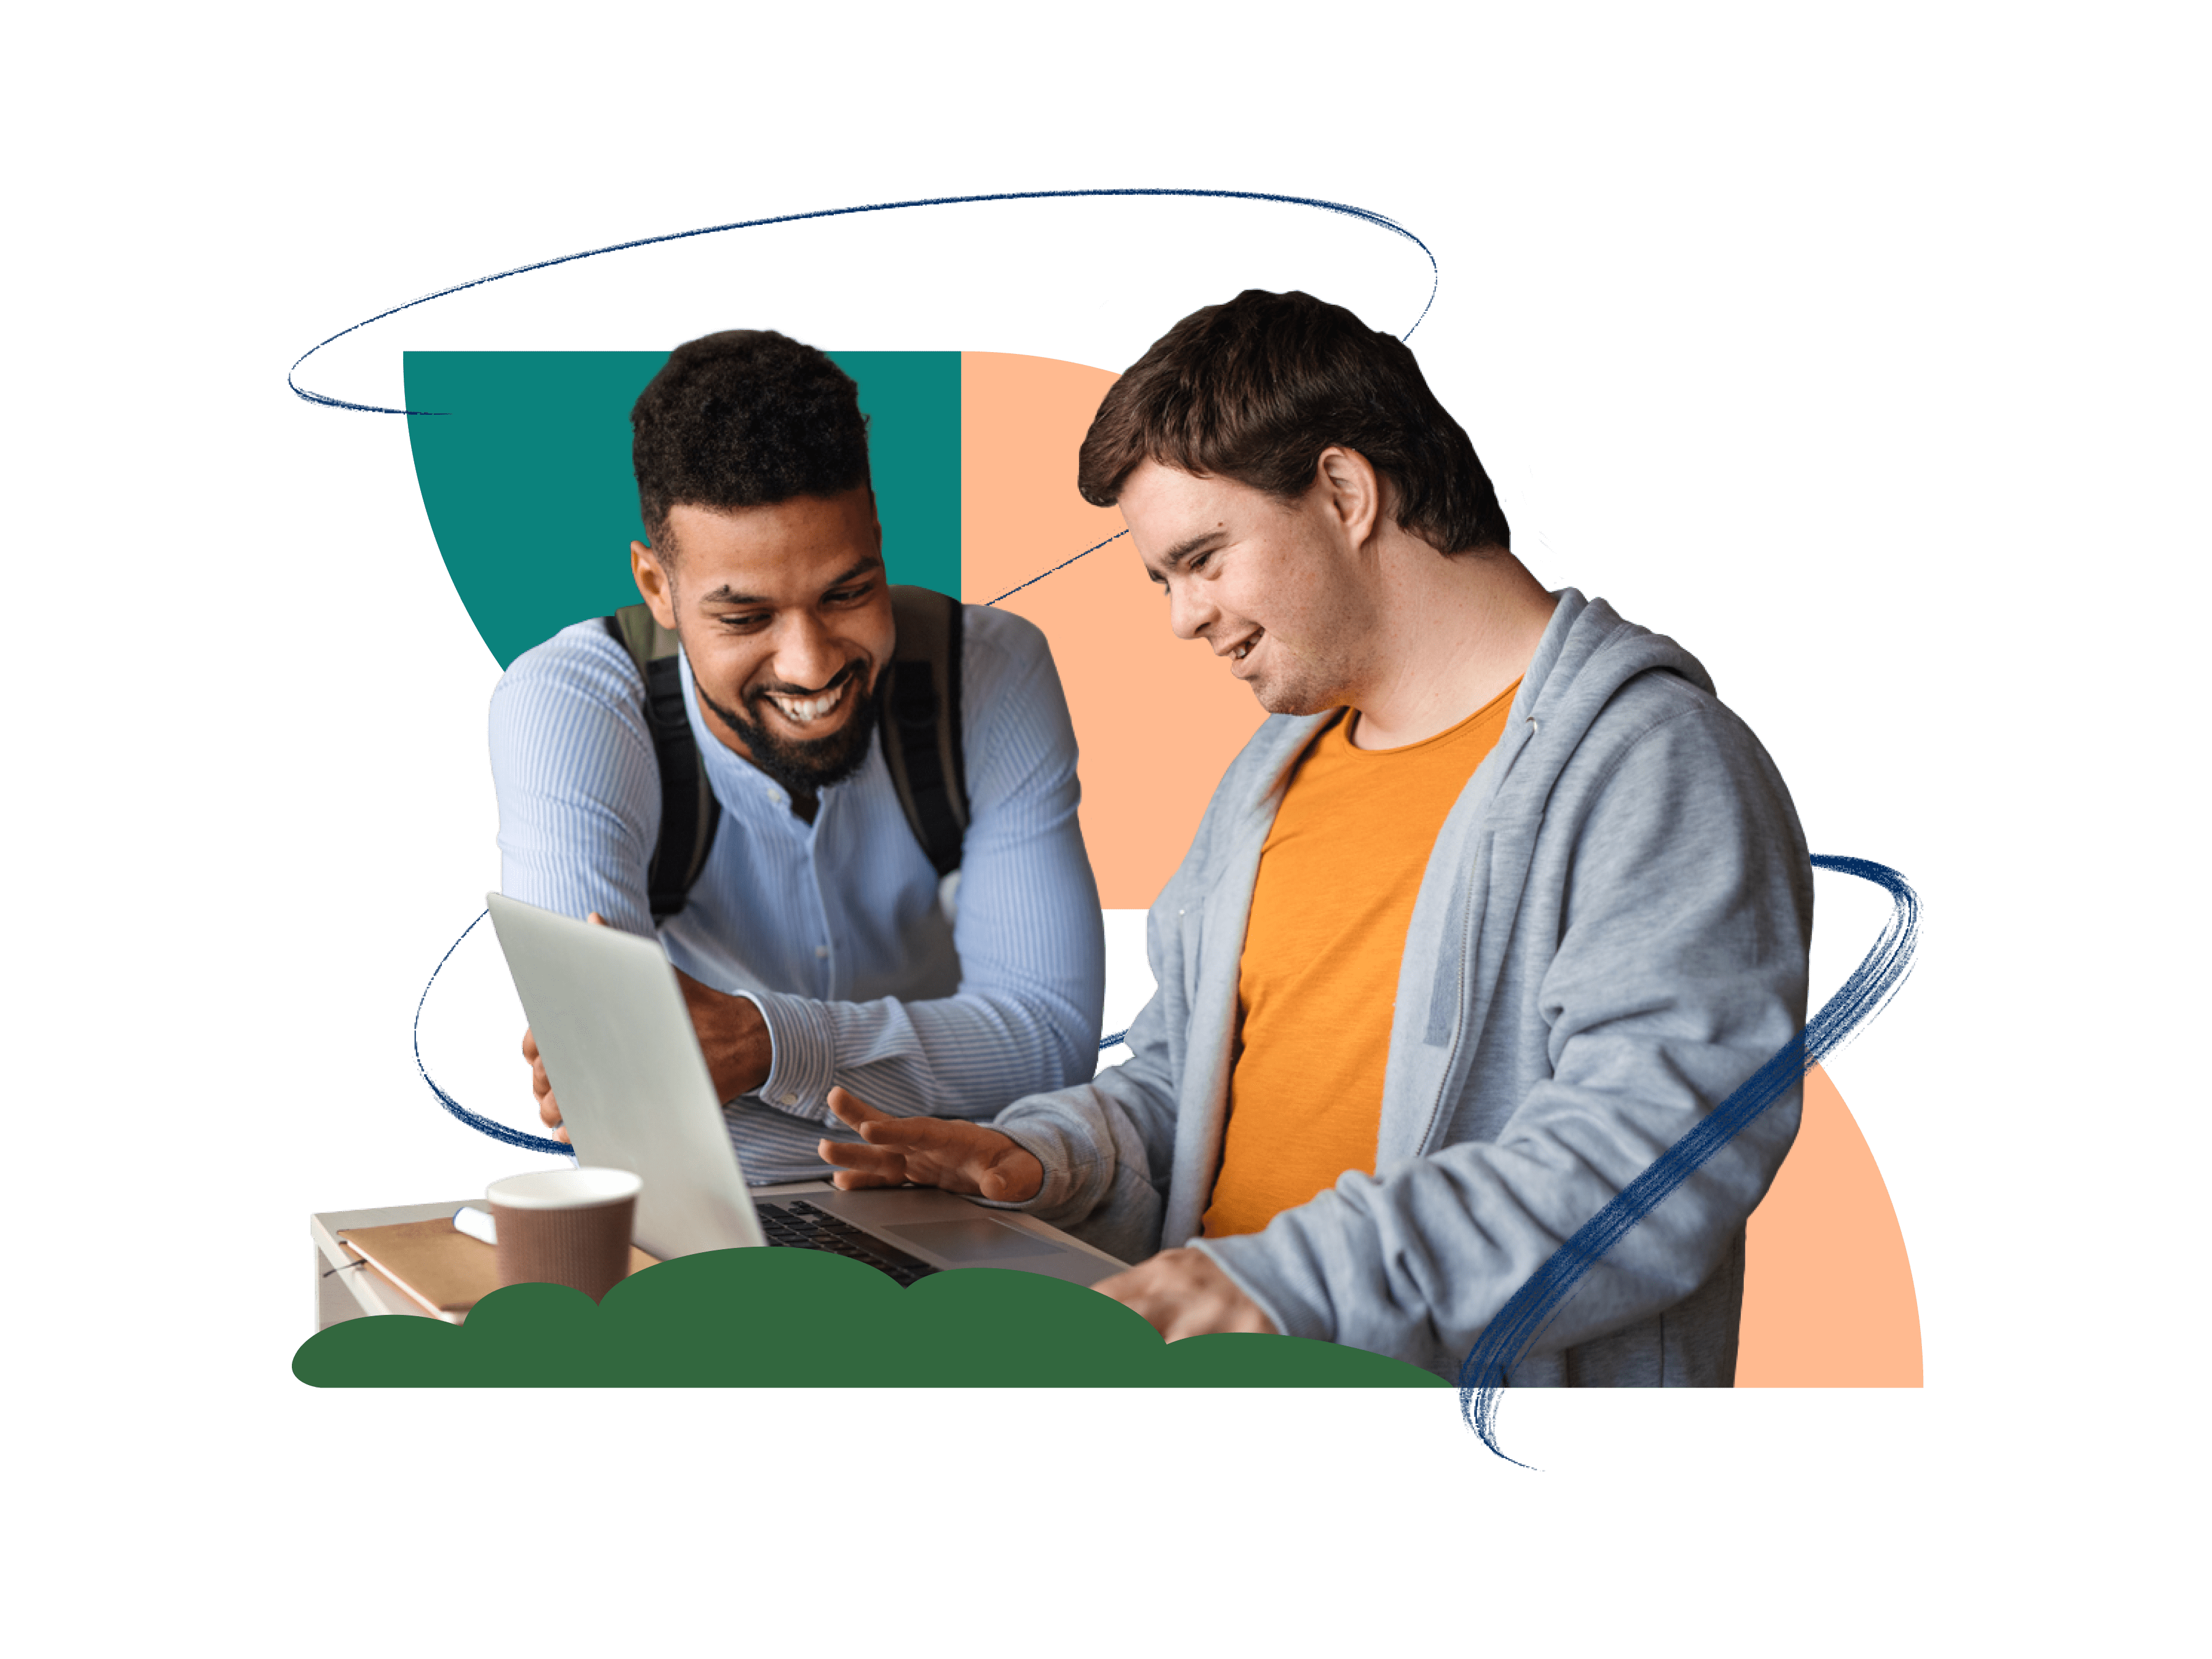 Two men looking at a laptop surrounded by graphic elements